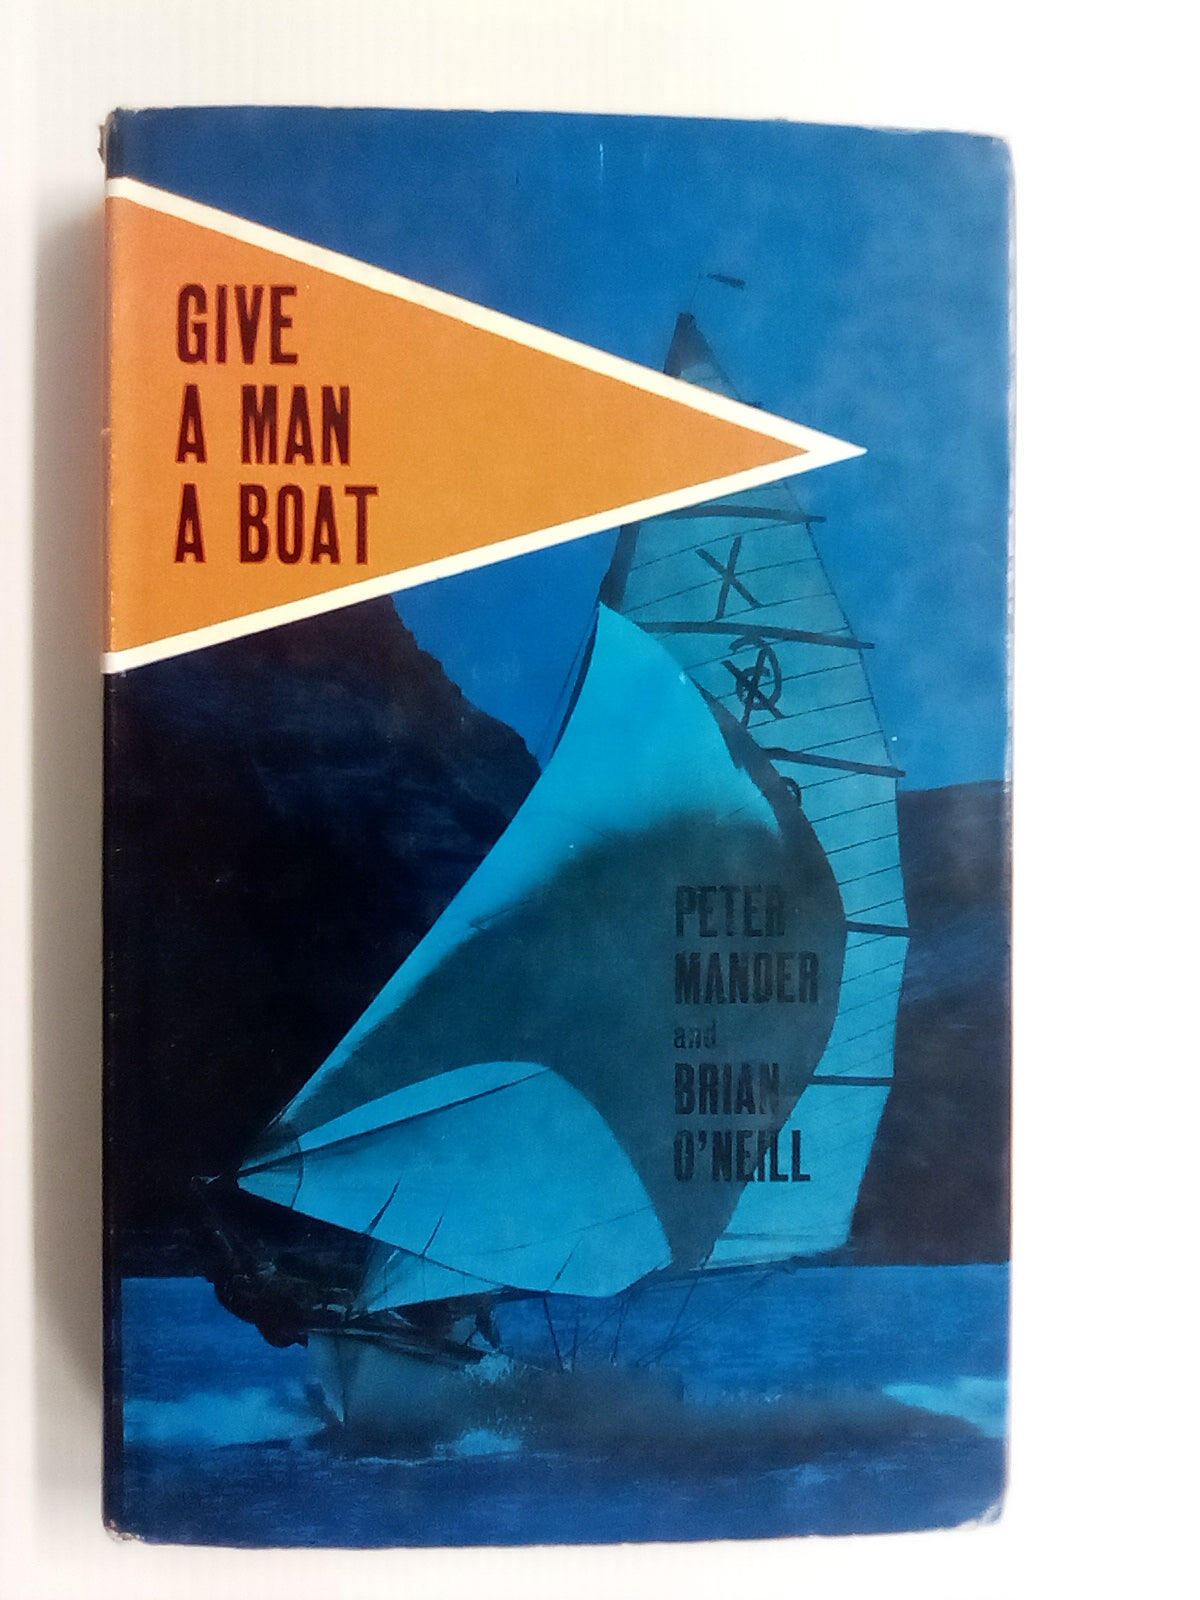 Give A Man A Boat (1964) by Peter Mander and Brian O'Neill